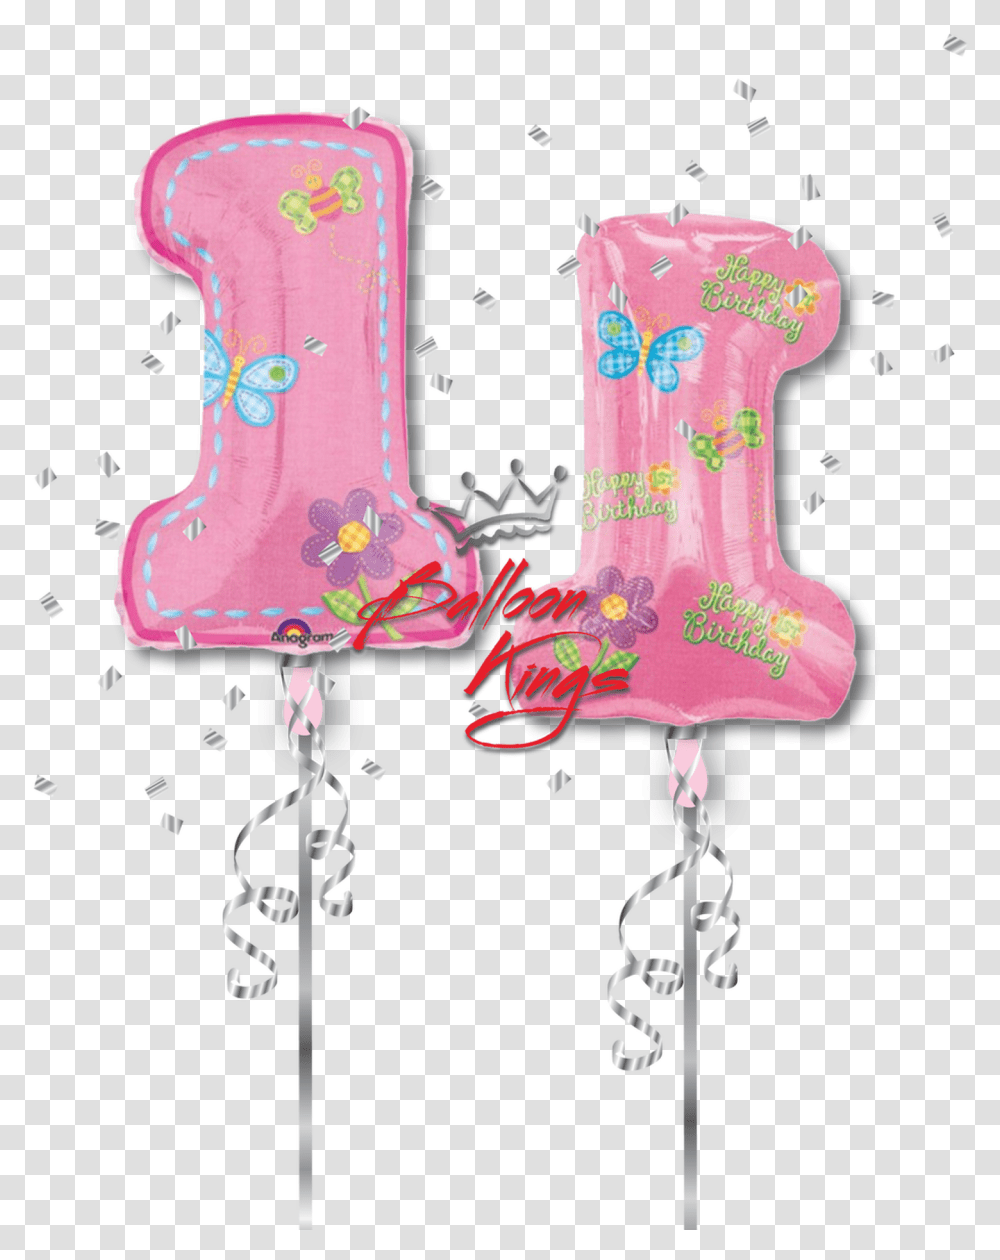 1st Birthday Girl Number Birthday Balloons, Sweets, Food, Confectionery, Ice Pop Transparent Png